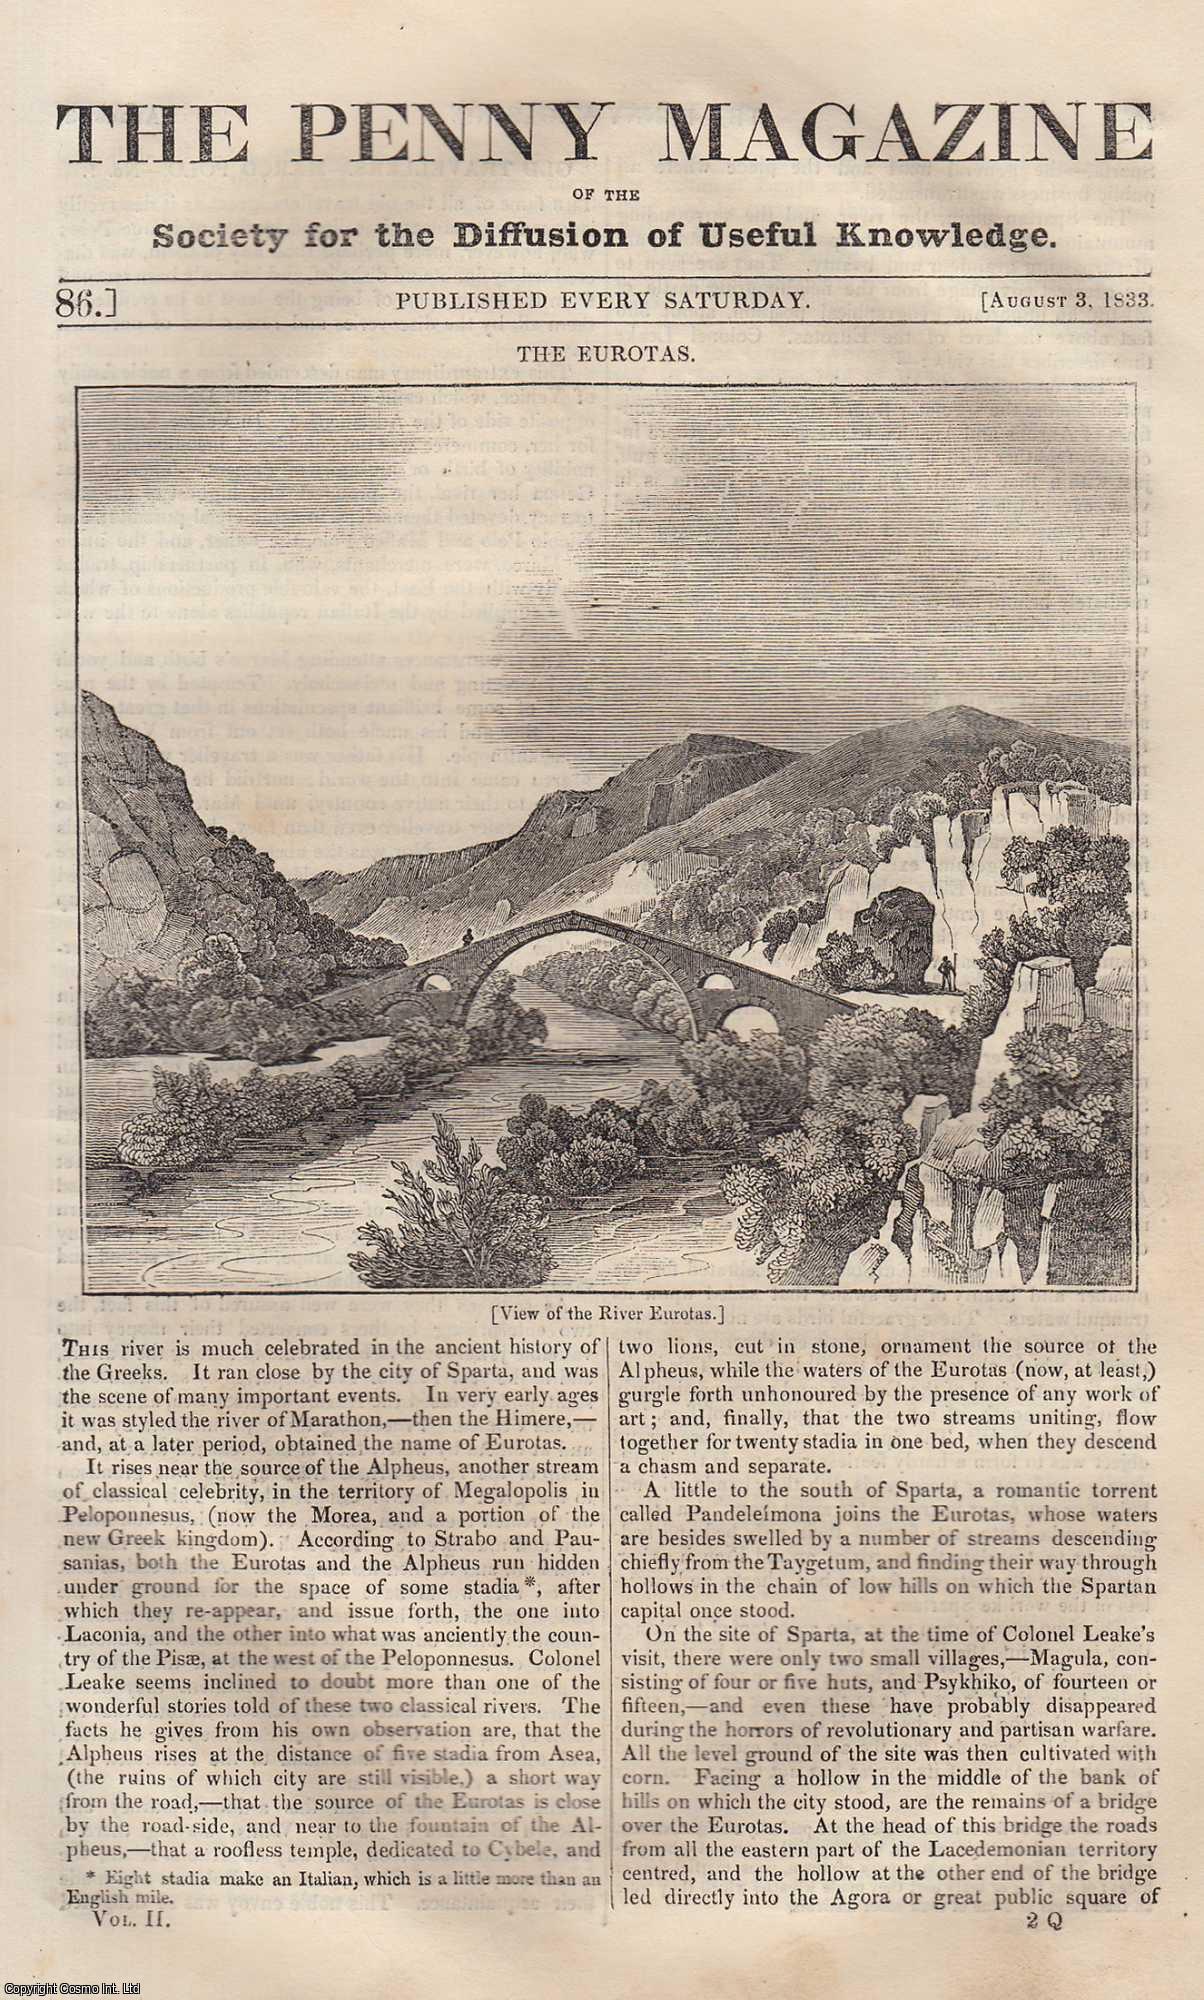 --- - The River of Eurotas; The Grain Worms; Eruption of Mount Aetna in 1832; The City of Carlisle, etc. Issue No. 86, August 3rd, 1833. A complete rare weekly issue of the Penny Magazine, 1833.